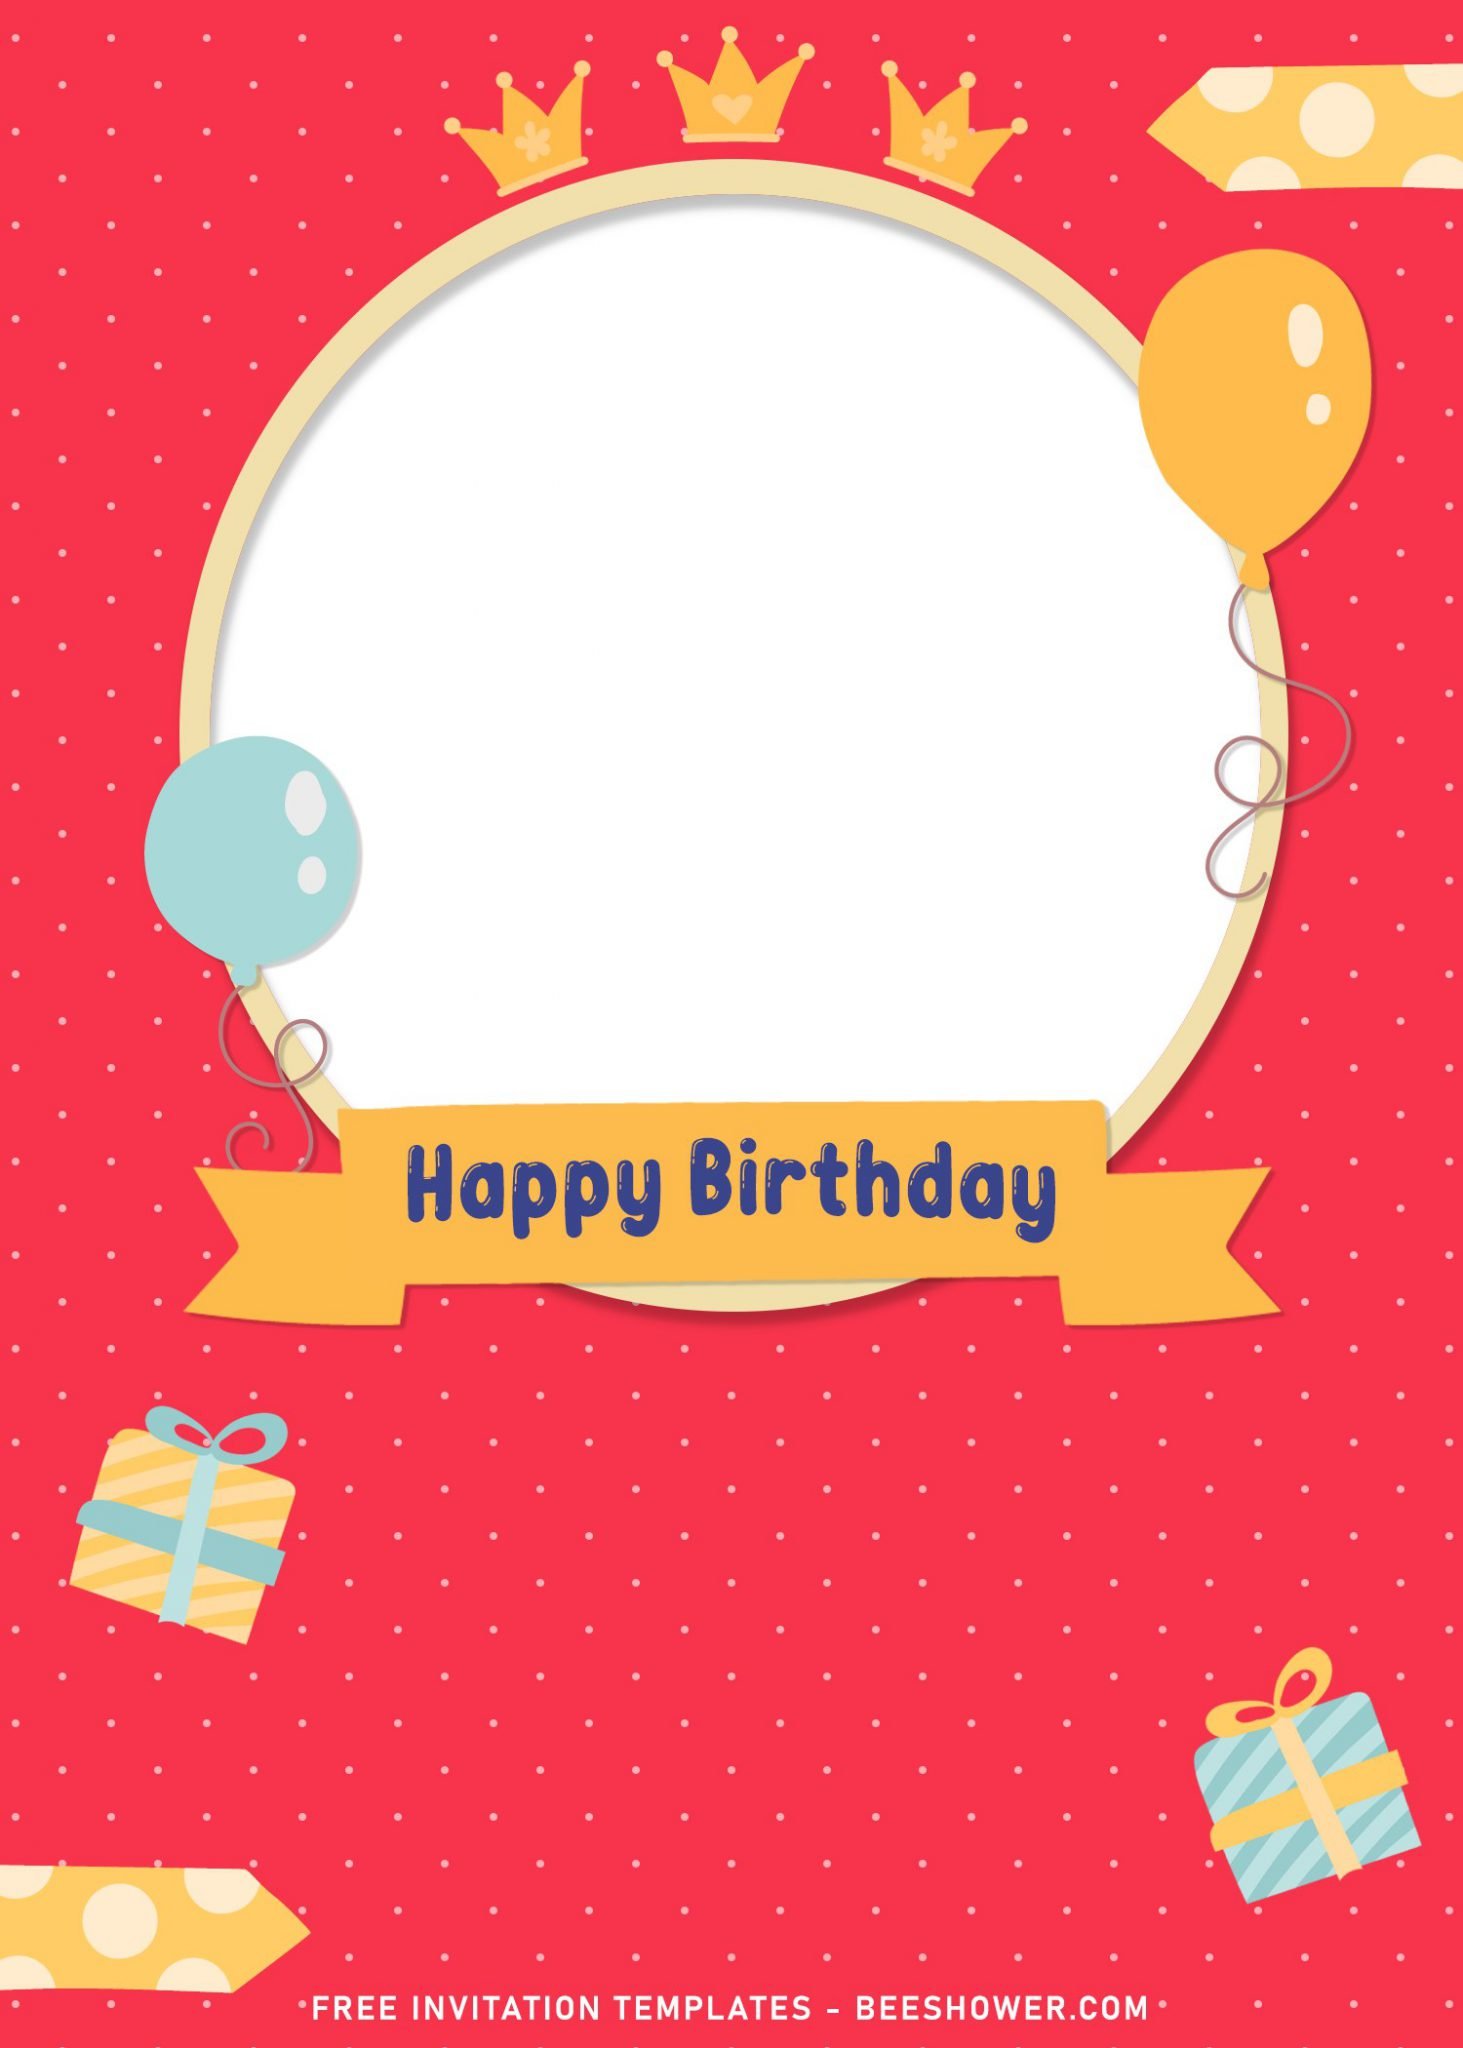 8+ Cute Birthday Invitation Templates For Your Kid's Birthday Party